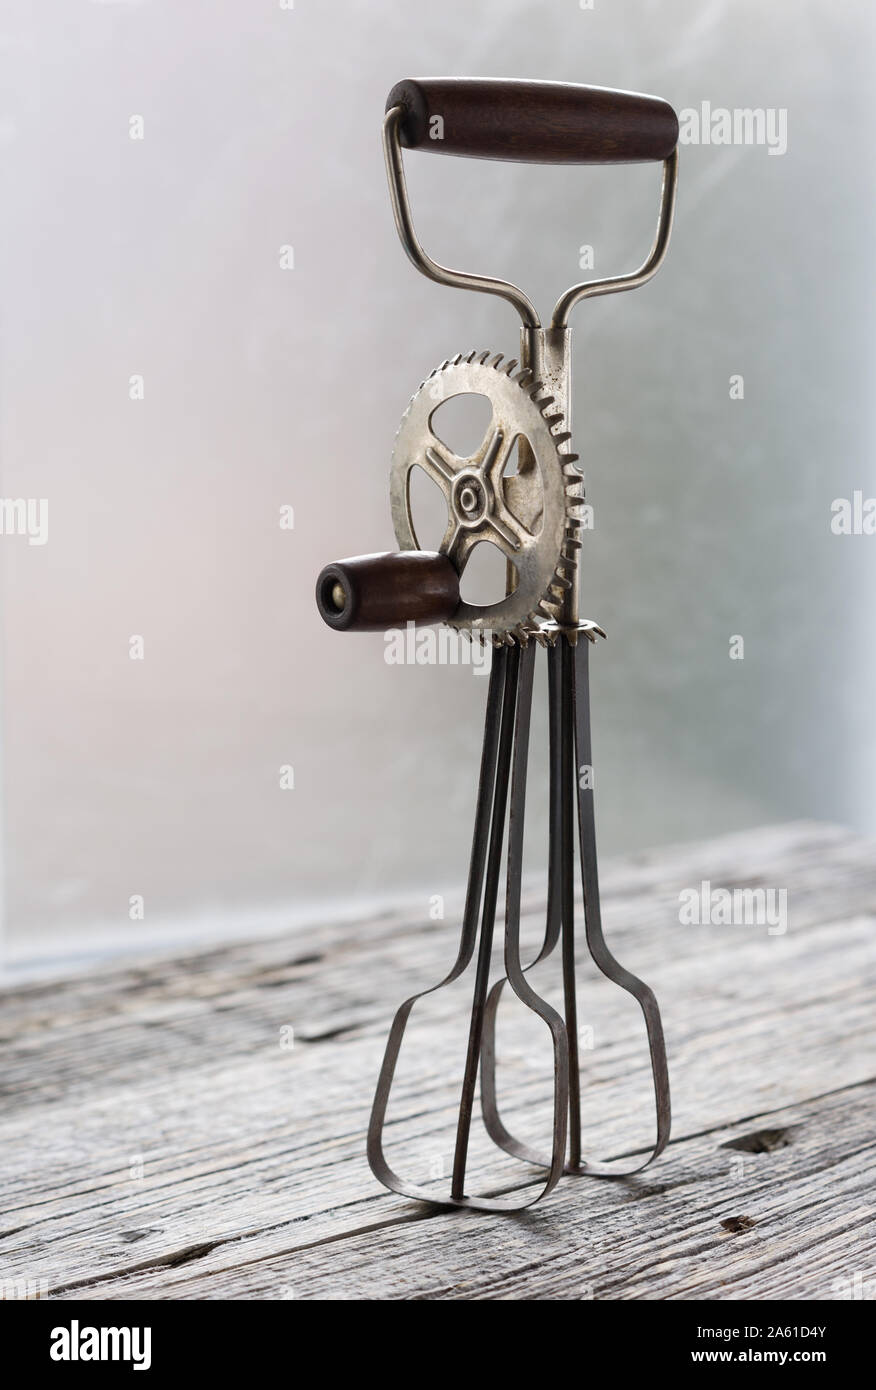 https://c8.alamy.com/comp/2A61D4Y/vintage-manual-whisk-eggs-beater-stand-on-the-the-rustic-wooden-table-vertical-with-copy-space-2A61D4Y.jpg